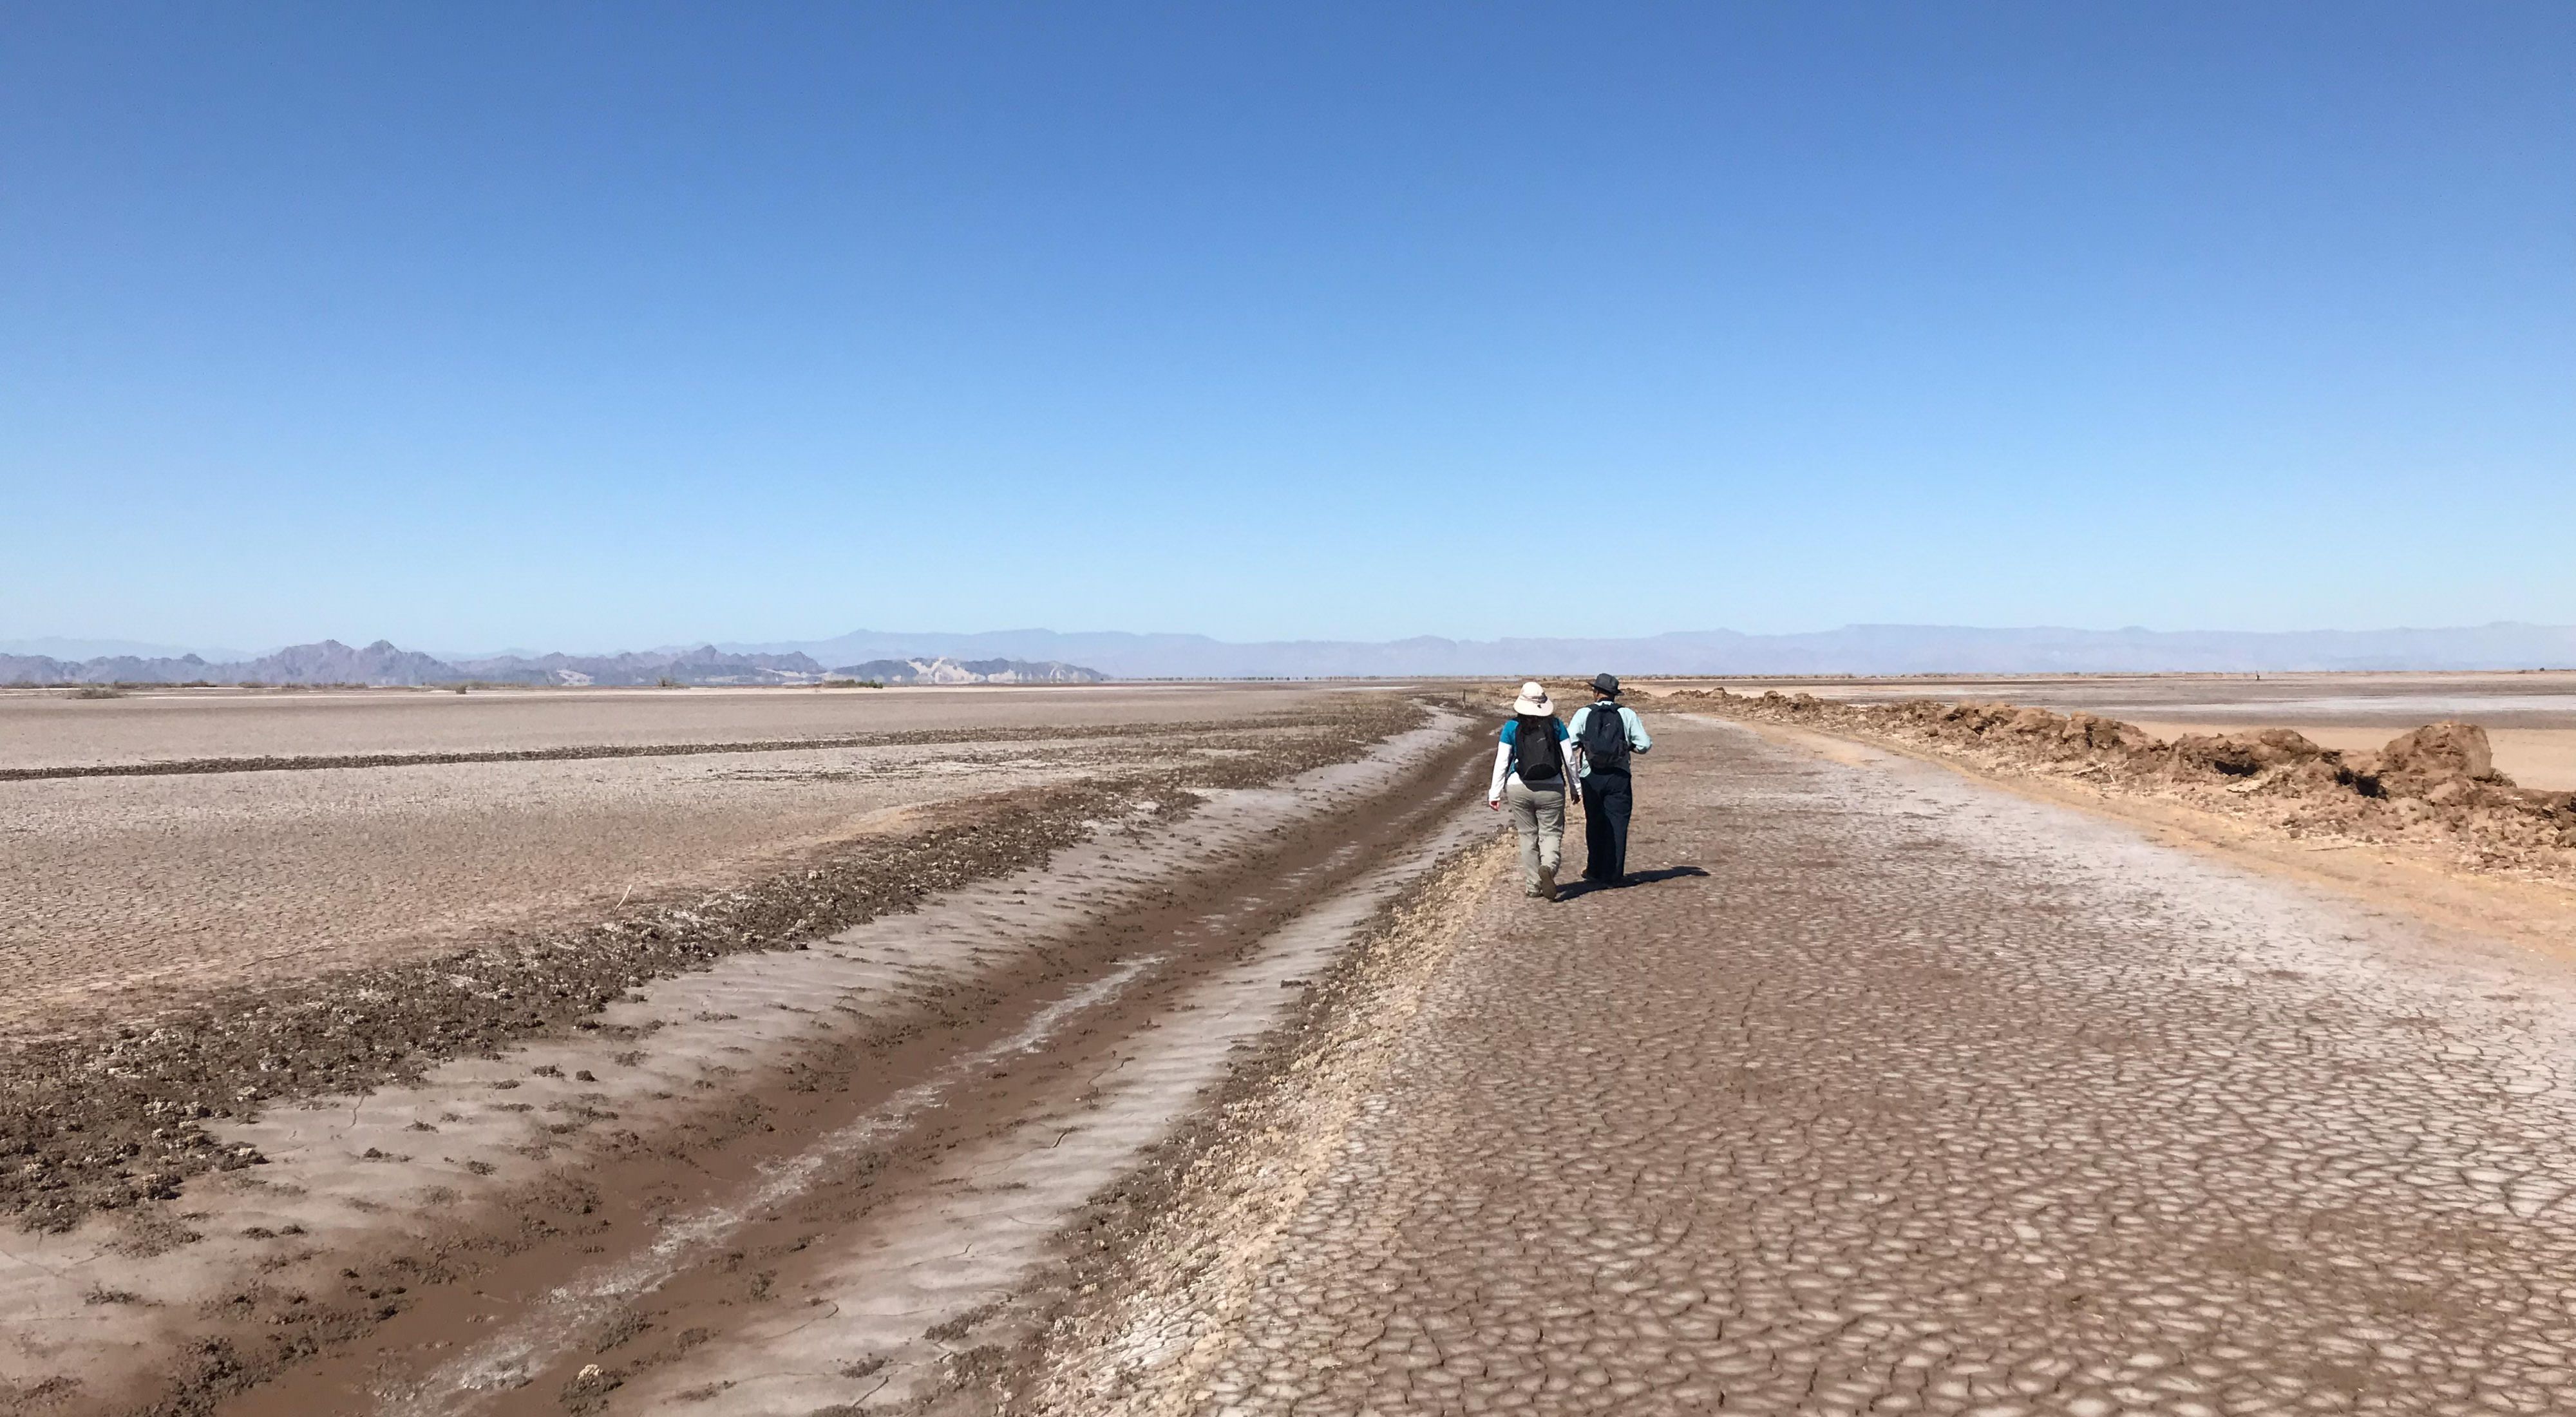 Two Sonoran Institute scientists walk next to a dredged channel along the estuary that provides a path for tidal water to escape back to the ocean.